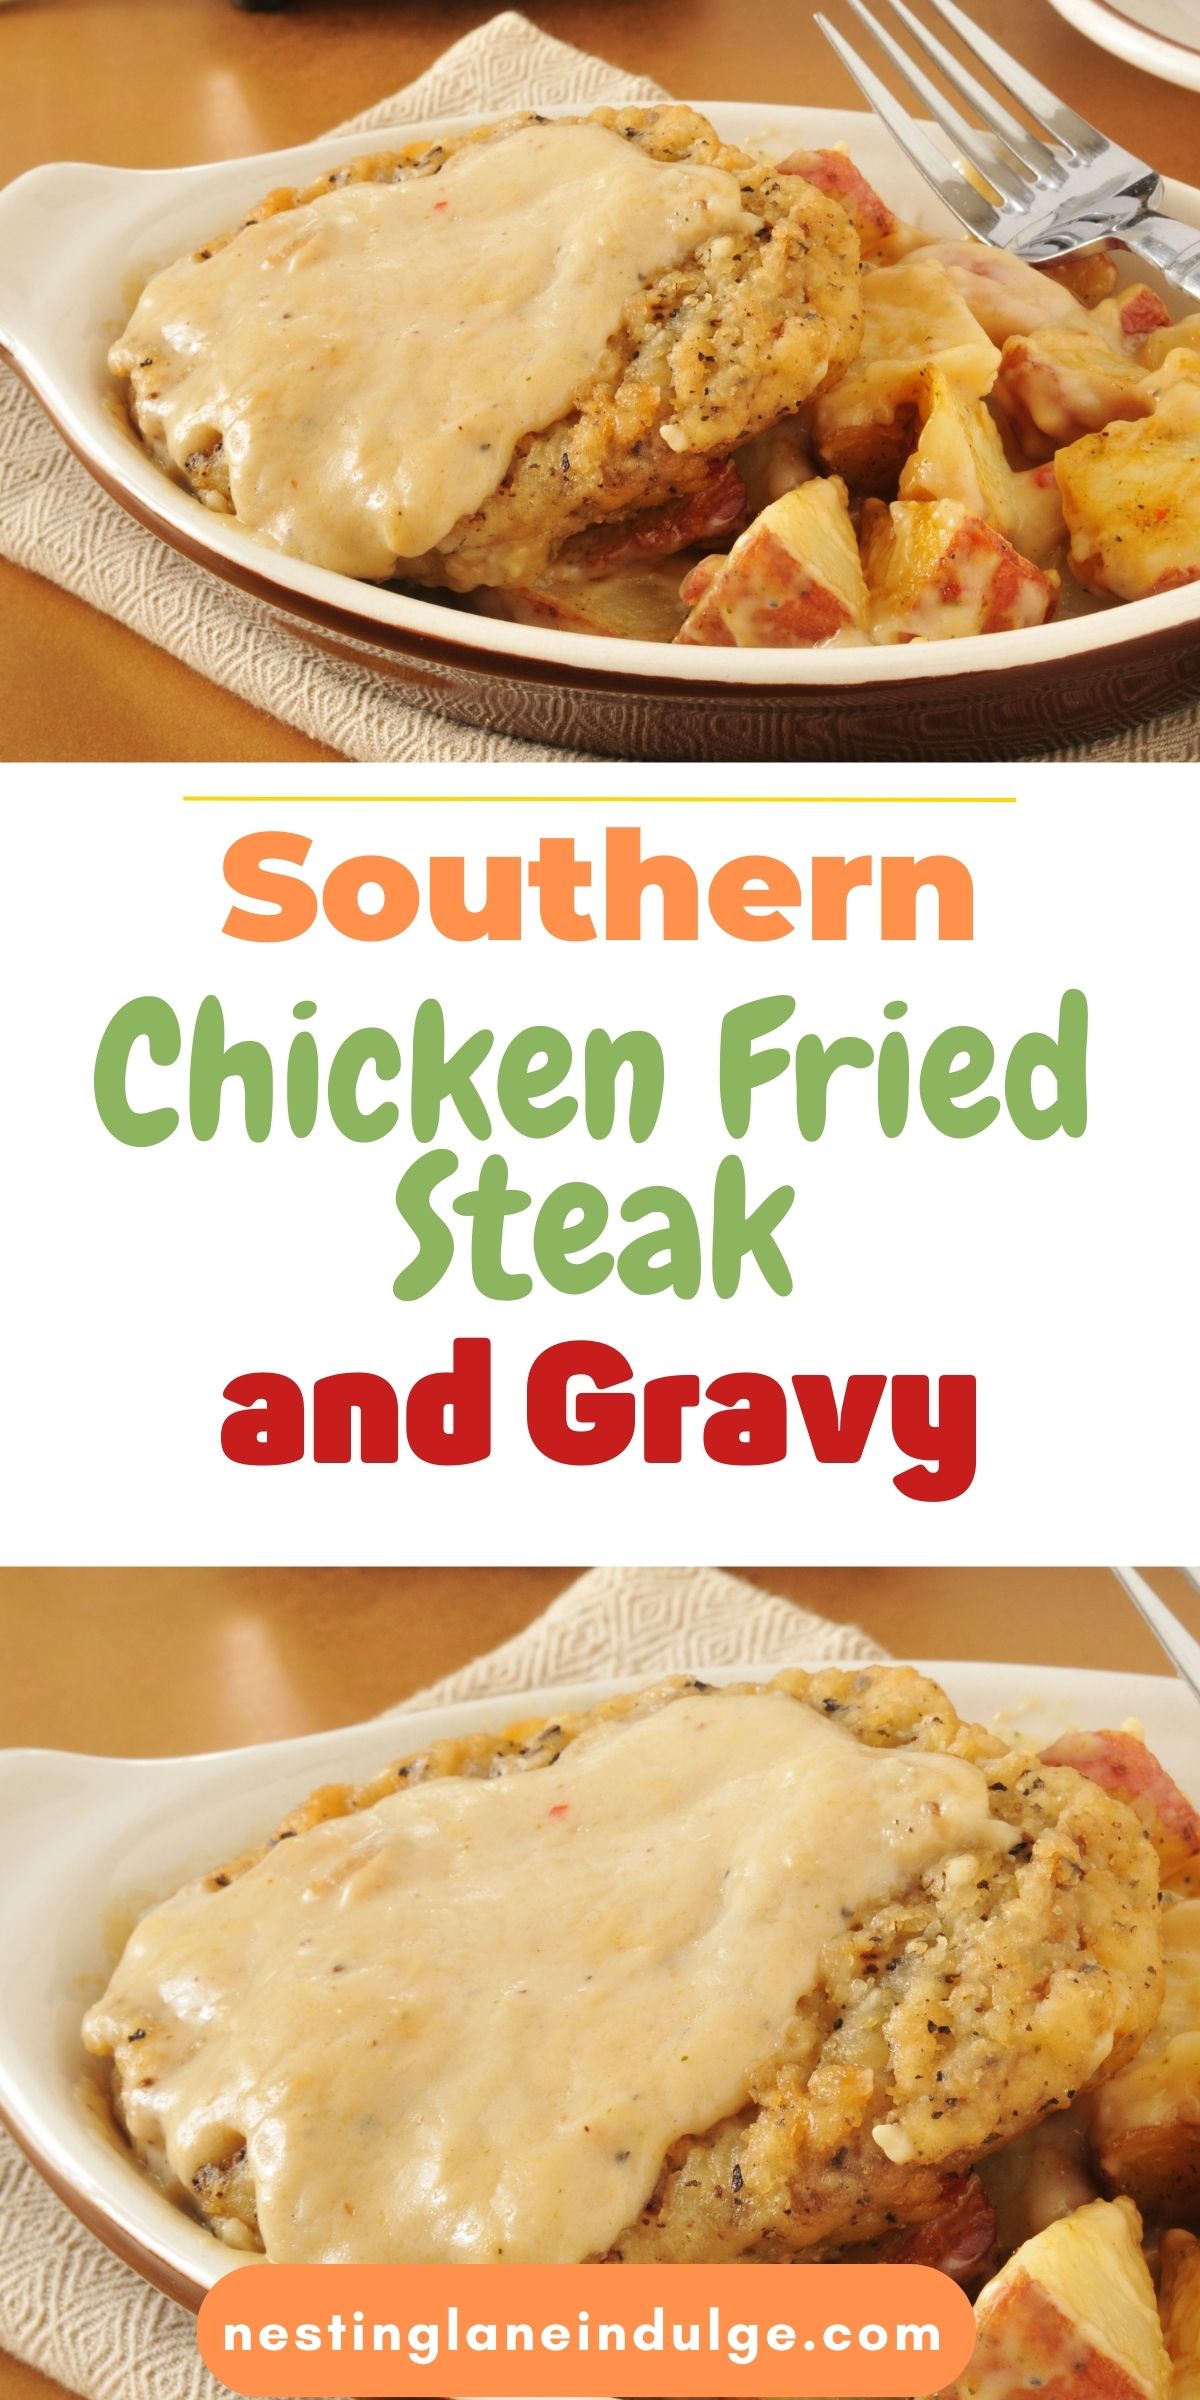 Southern Chicken Fried Steak and Gravy Graphic.